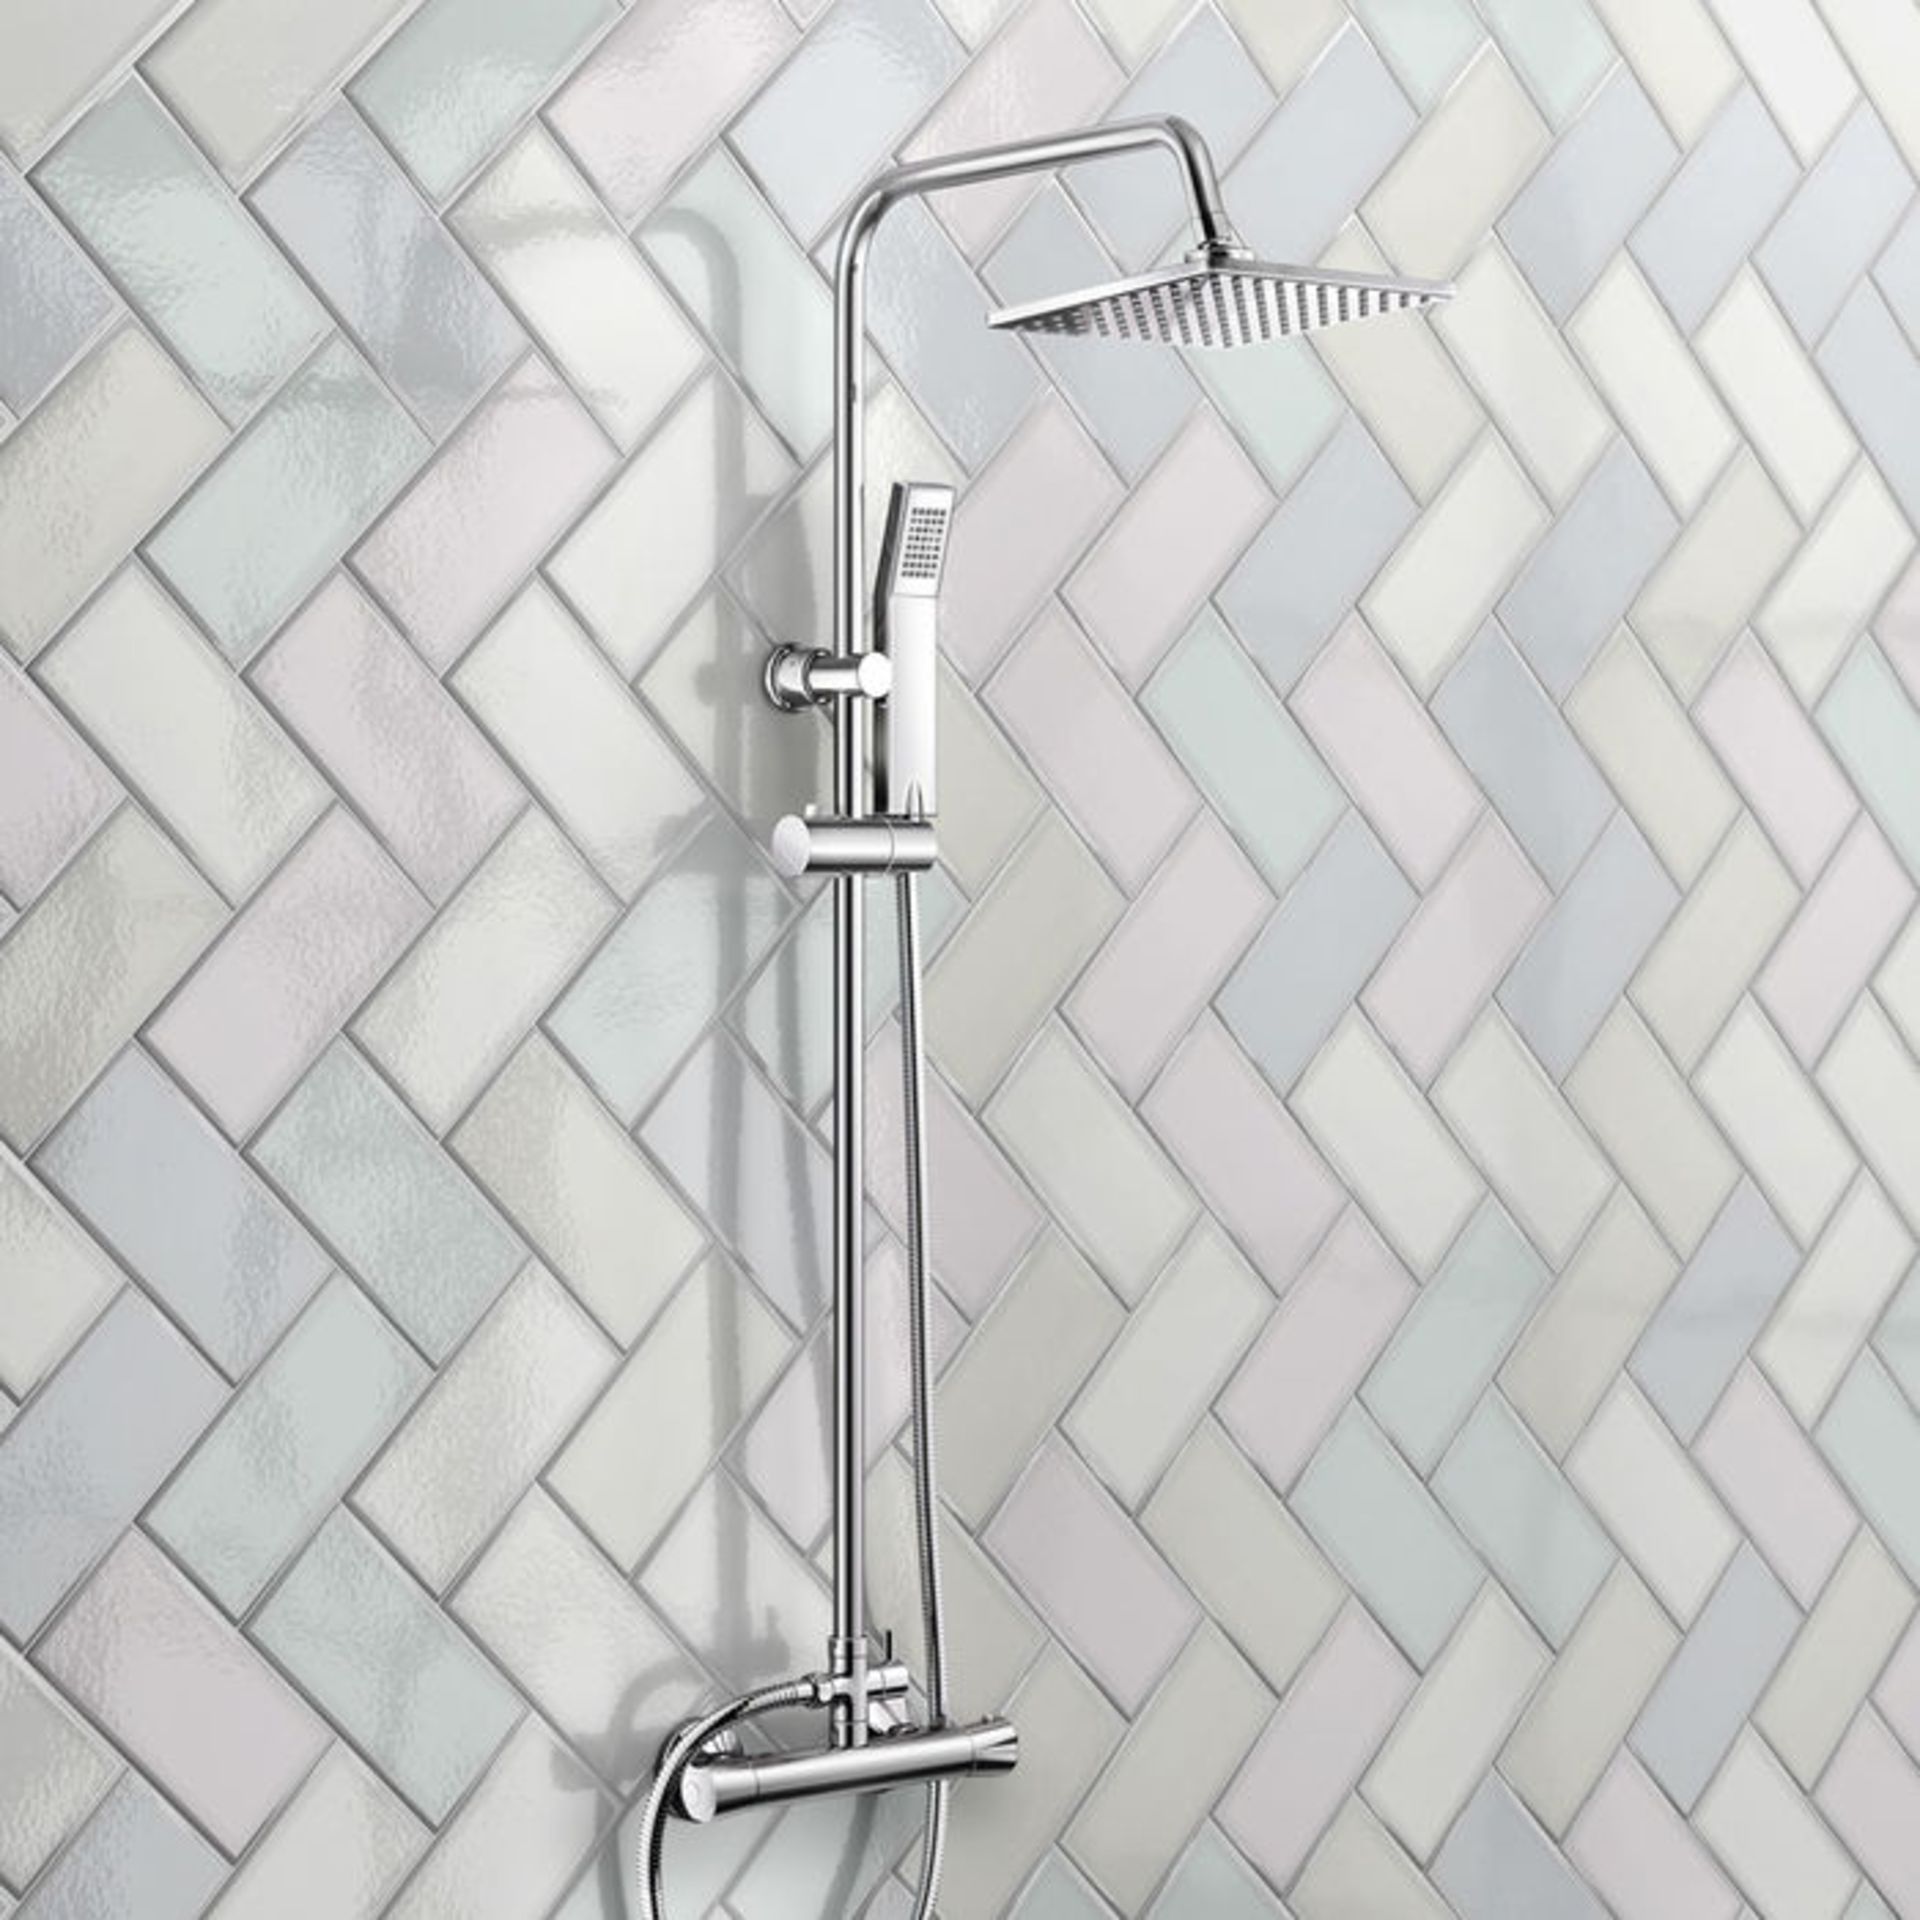 (AH34) Square Exposed Thermostatic Shower Kit & Medium Head. Curved features and contemporary - Image 3 of 3